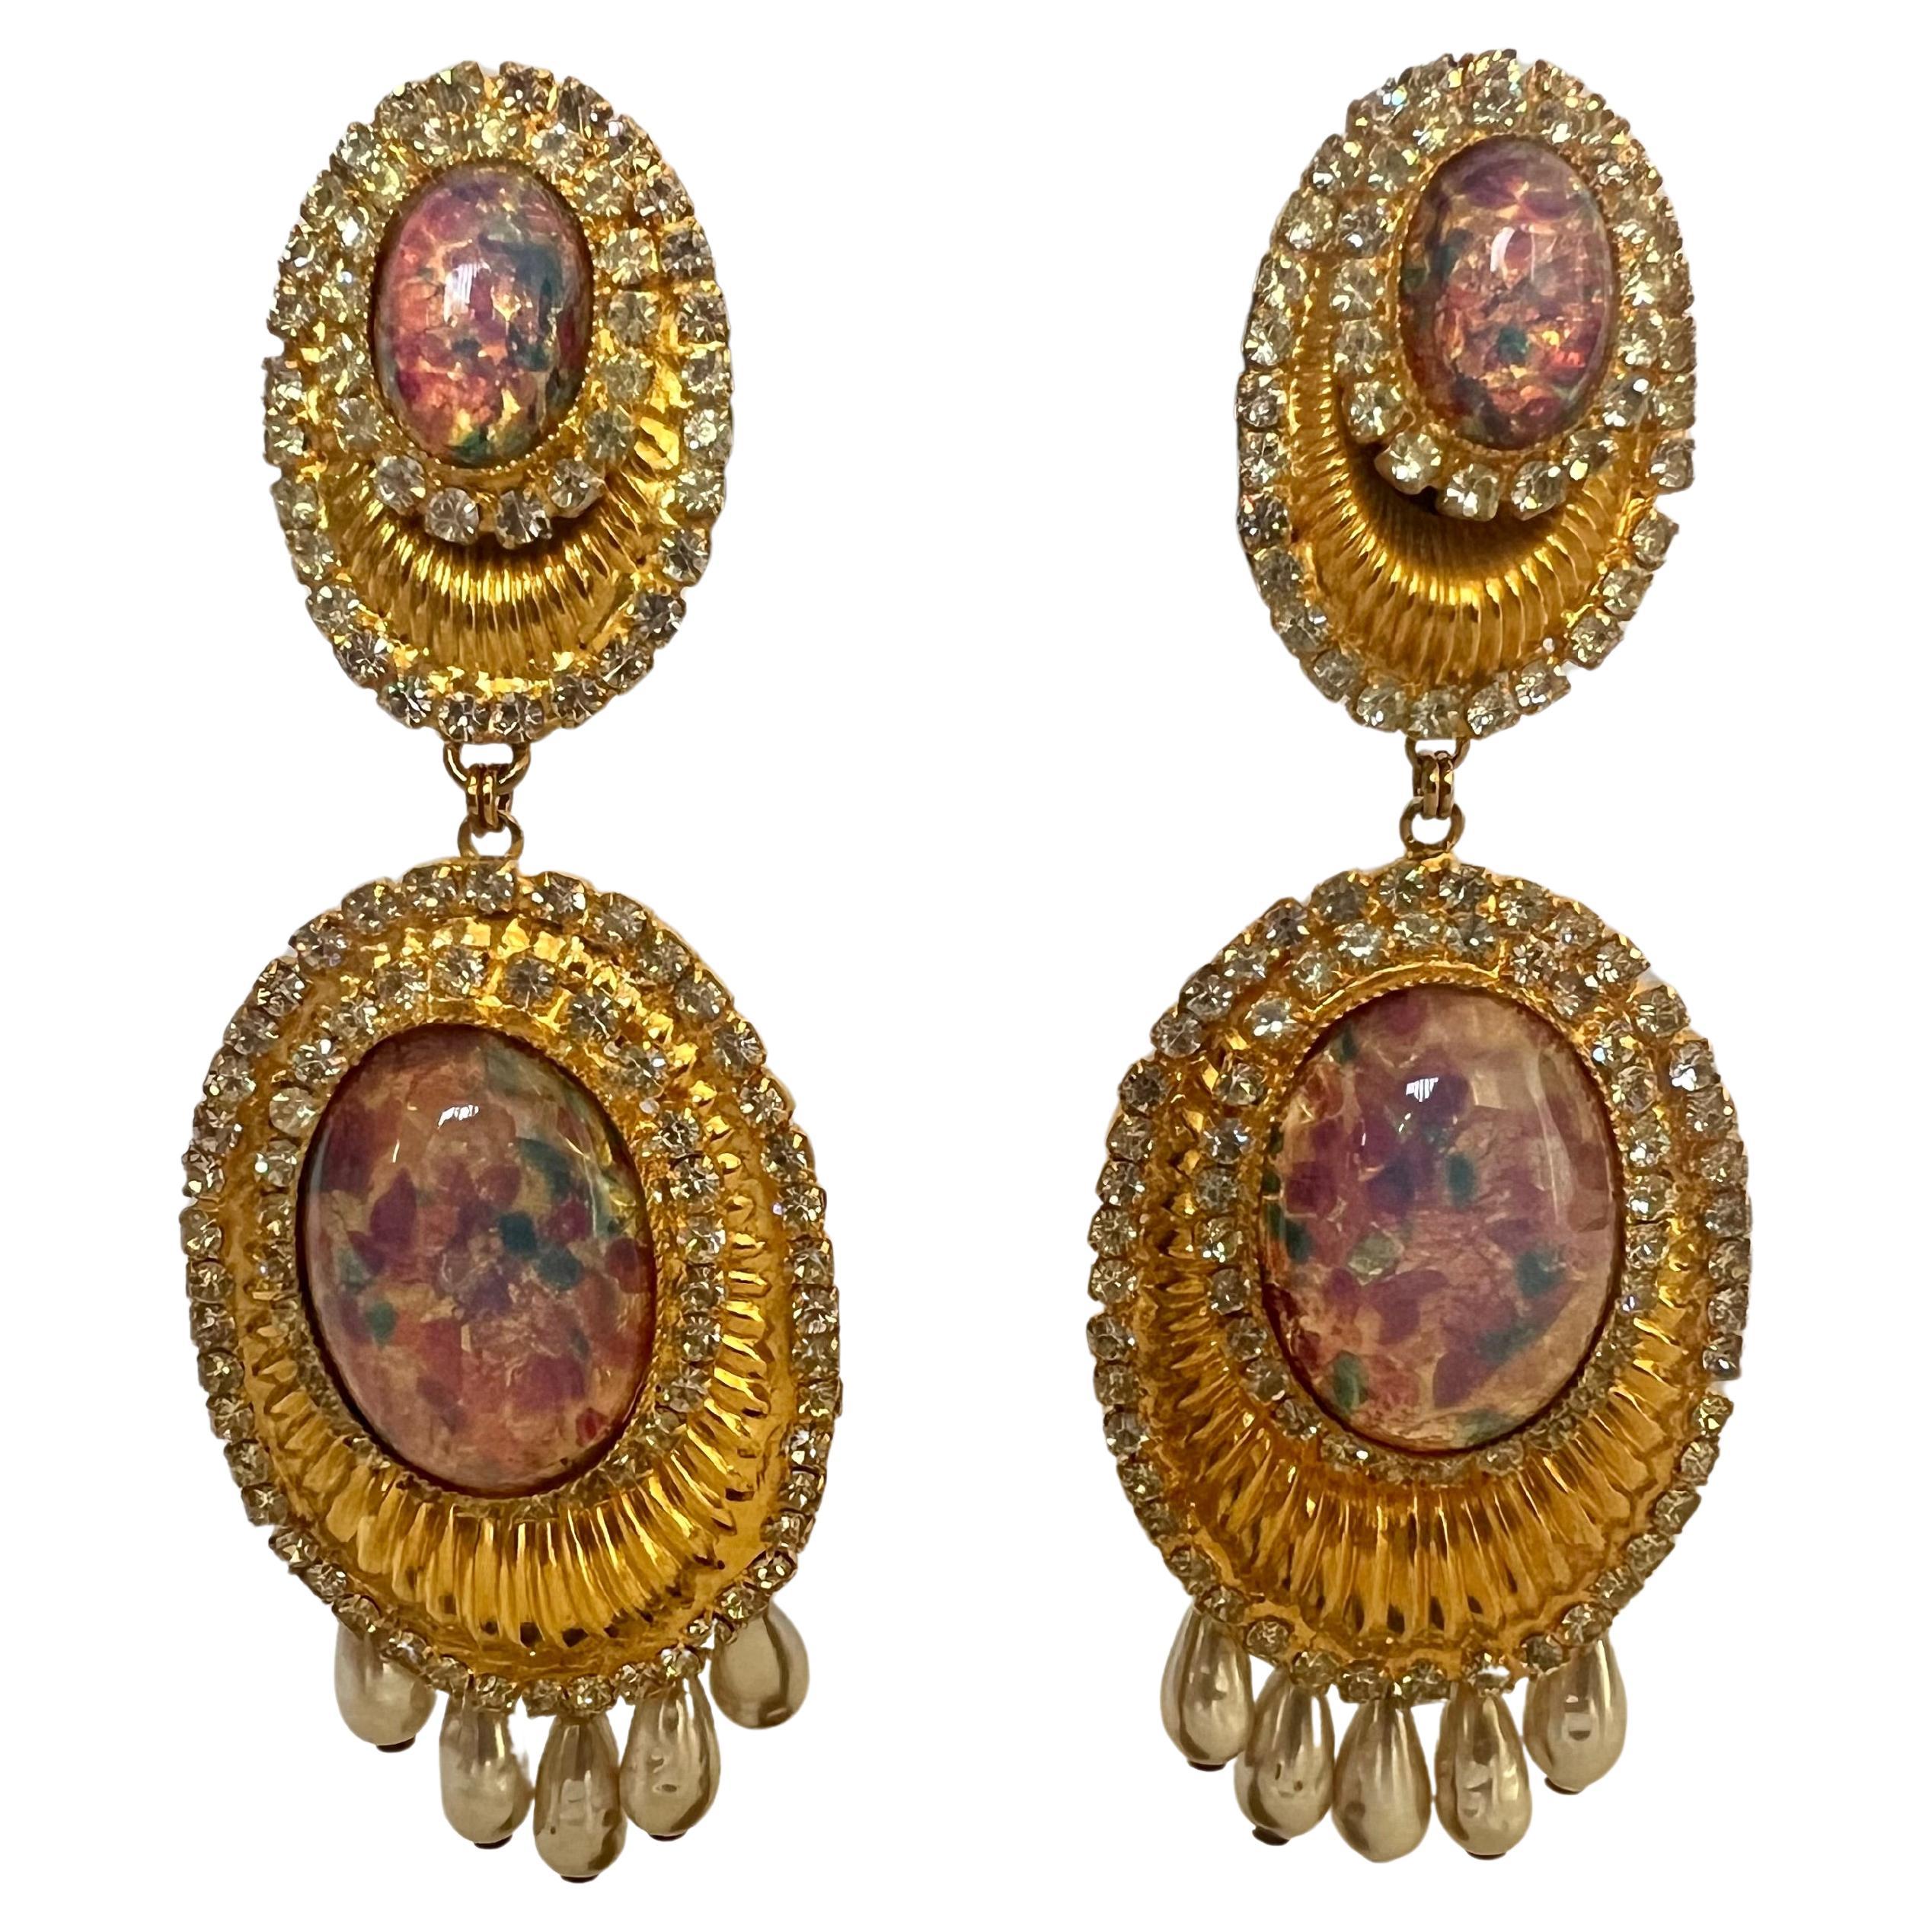 Vintage Gilt Faux Diamante, Opal, and Pearl Earrings by William de Lillo 